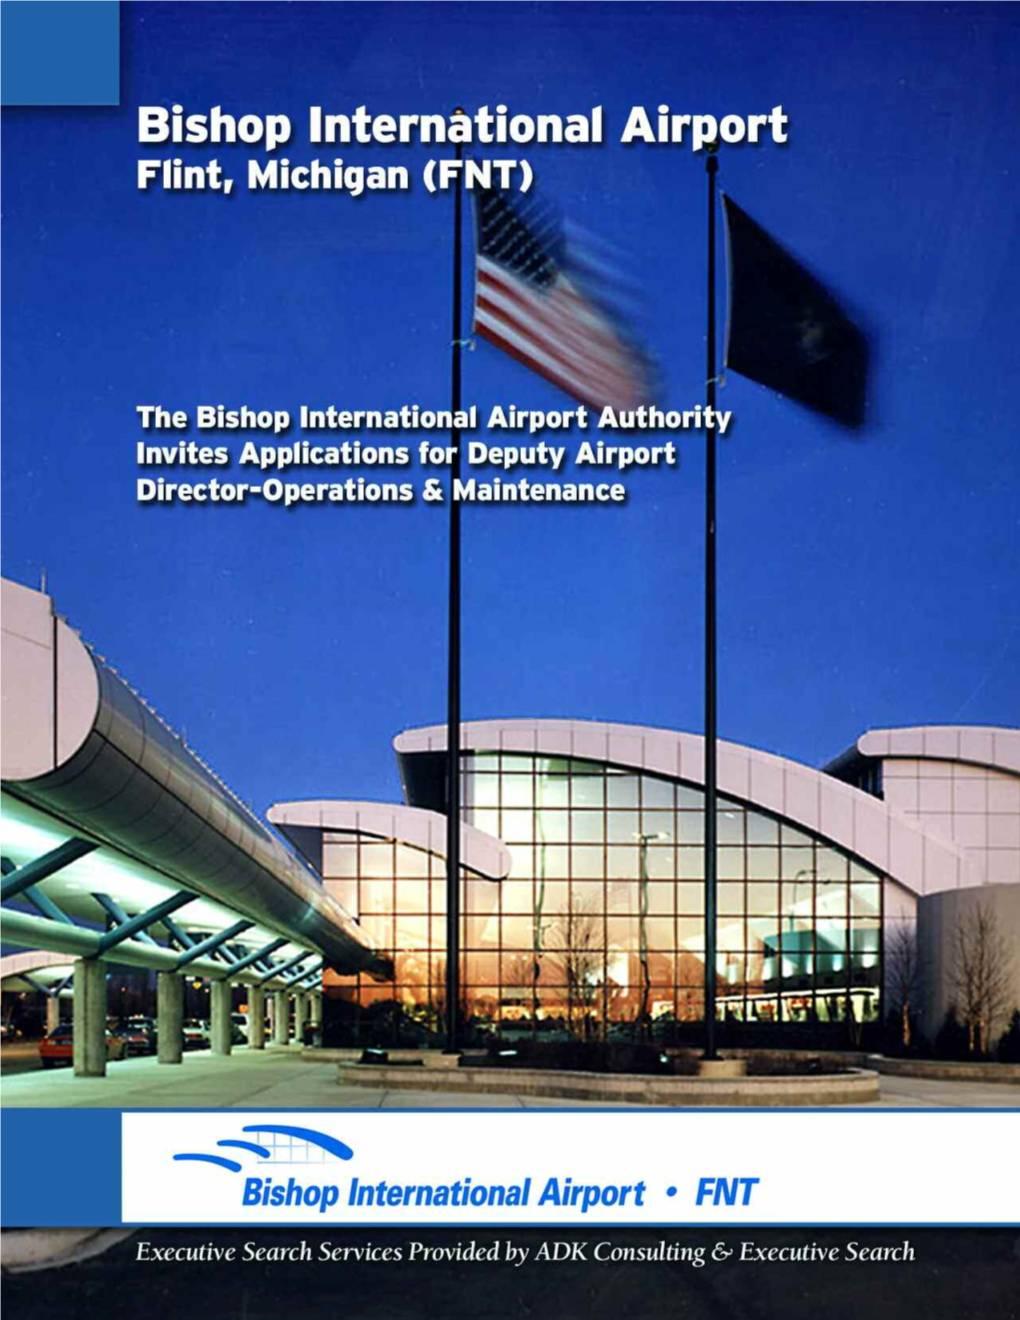 THE AIRPORT Bishop International Airport Is a Commercial Service and General Aviation Airport Located in Flint, Michigan